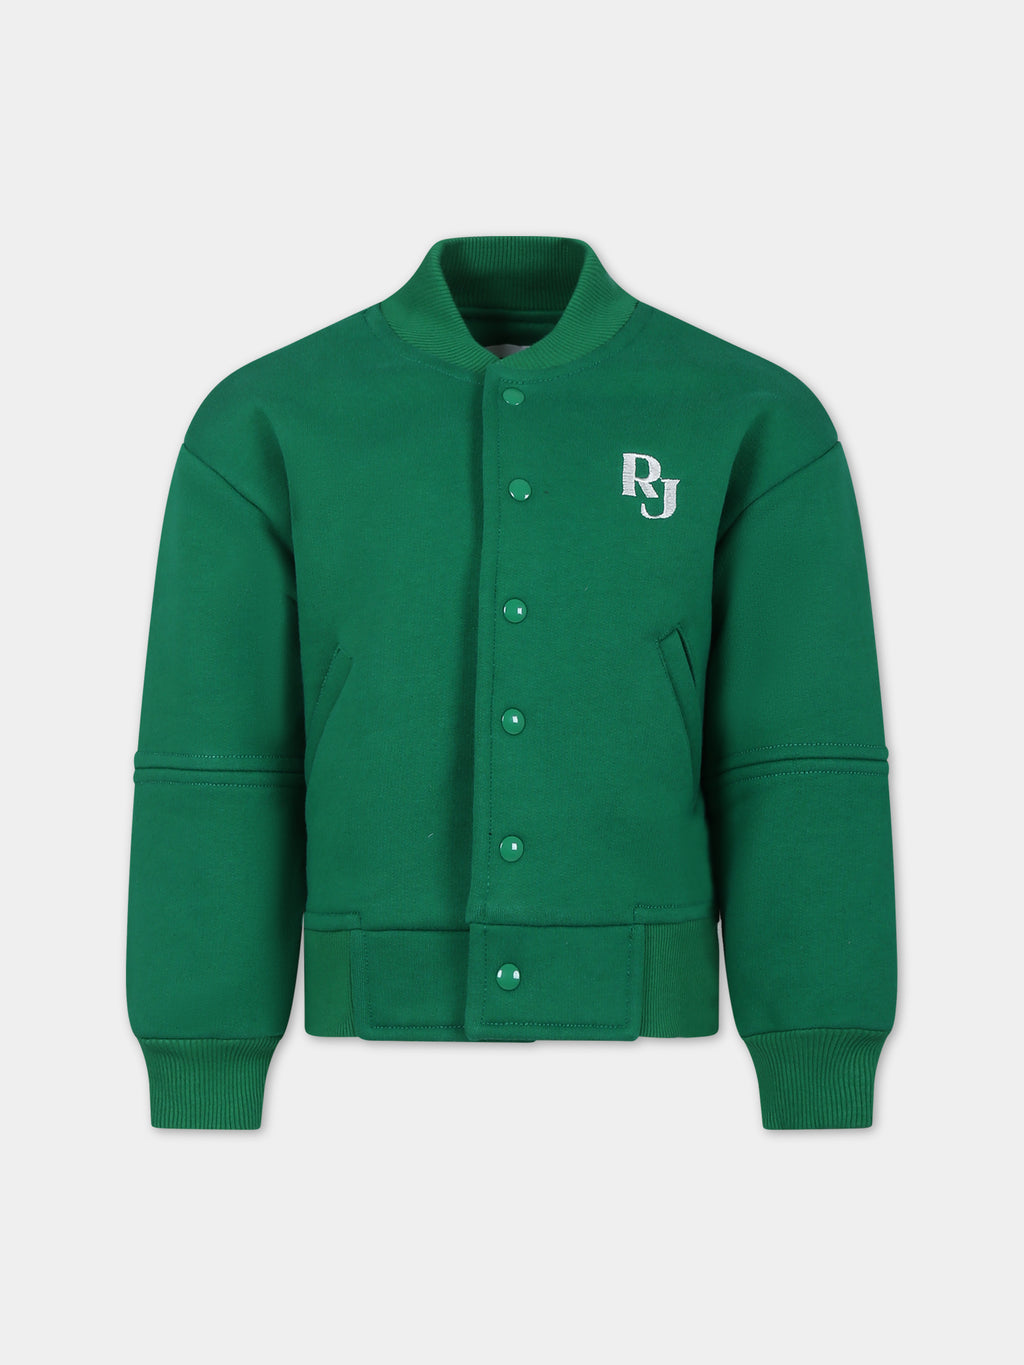 Green bomber jacket for kids with logo